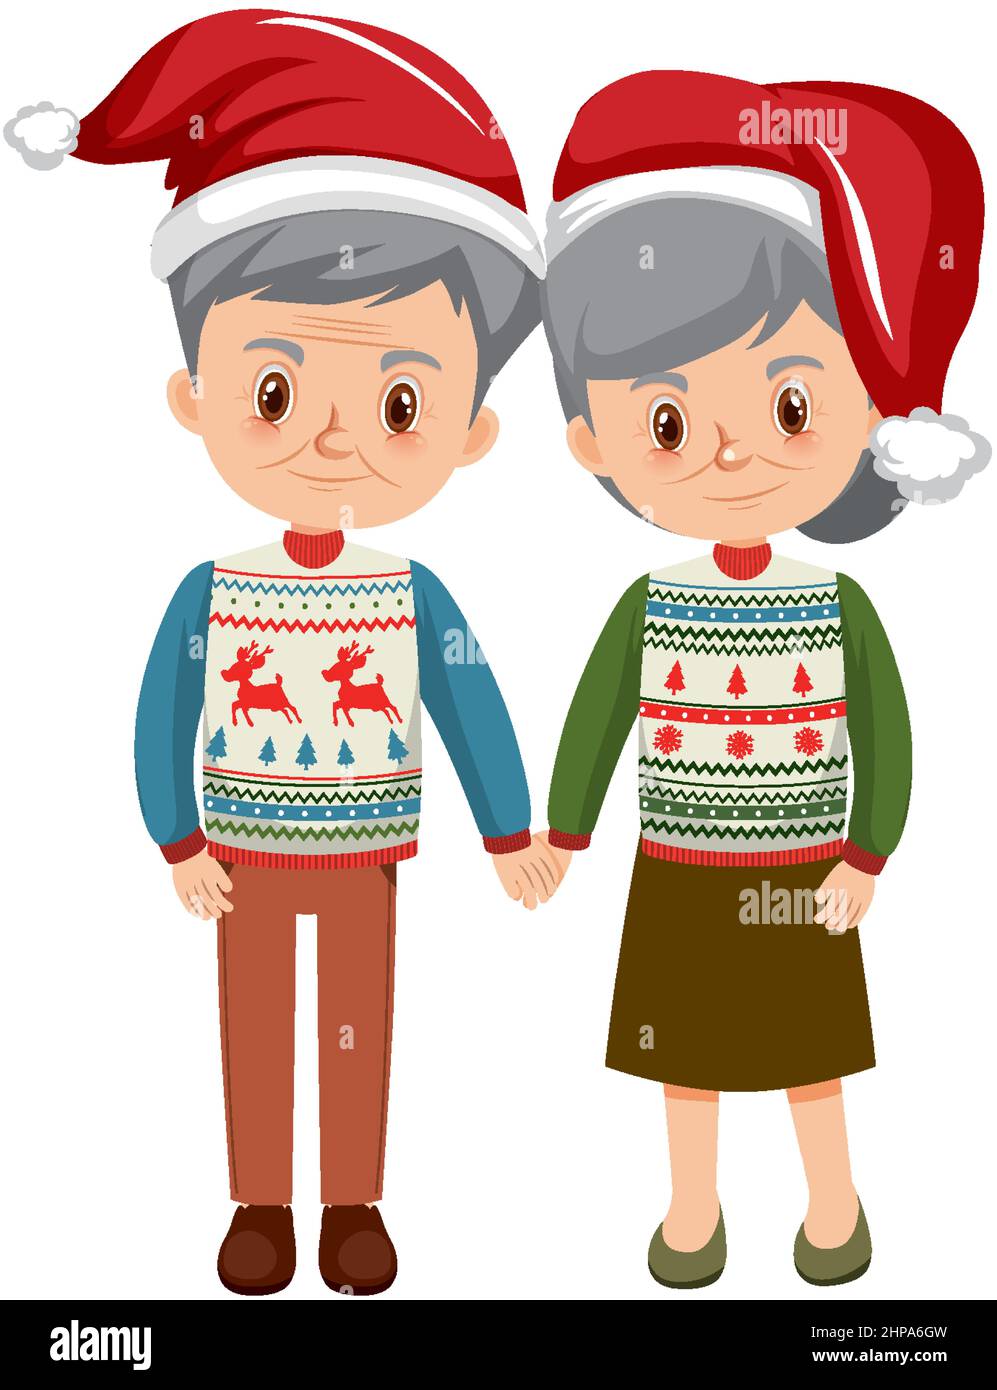 Old couple in Christmas outfits holding hands together illustration Stock Vector